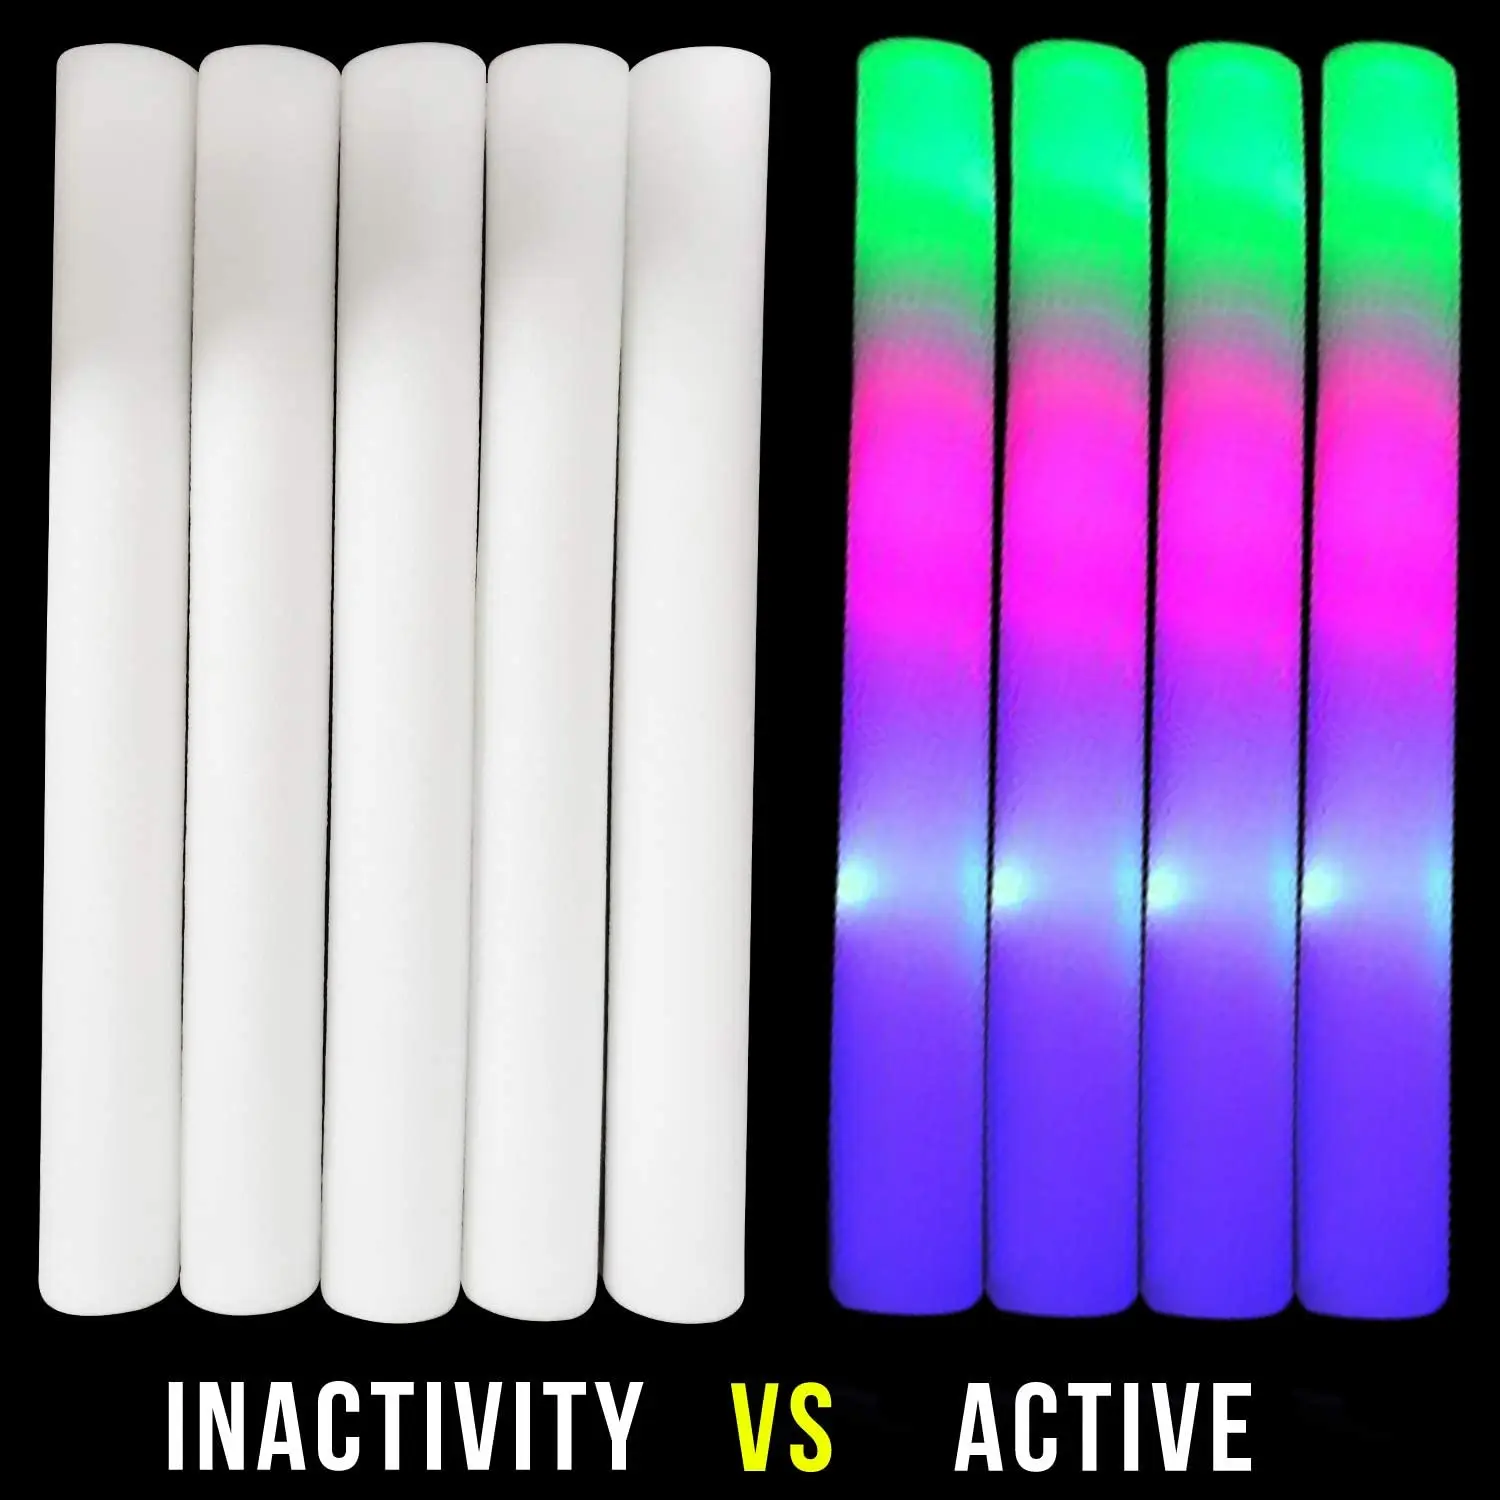 30/50 Pcs Led Foam Bar Glow In The Dark Light-up Foam Sticks Led Soft Batons  Rave Glow Wands Flashing Tube Concert For Party - Glow Party Supplies -  AliExpress